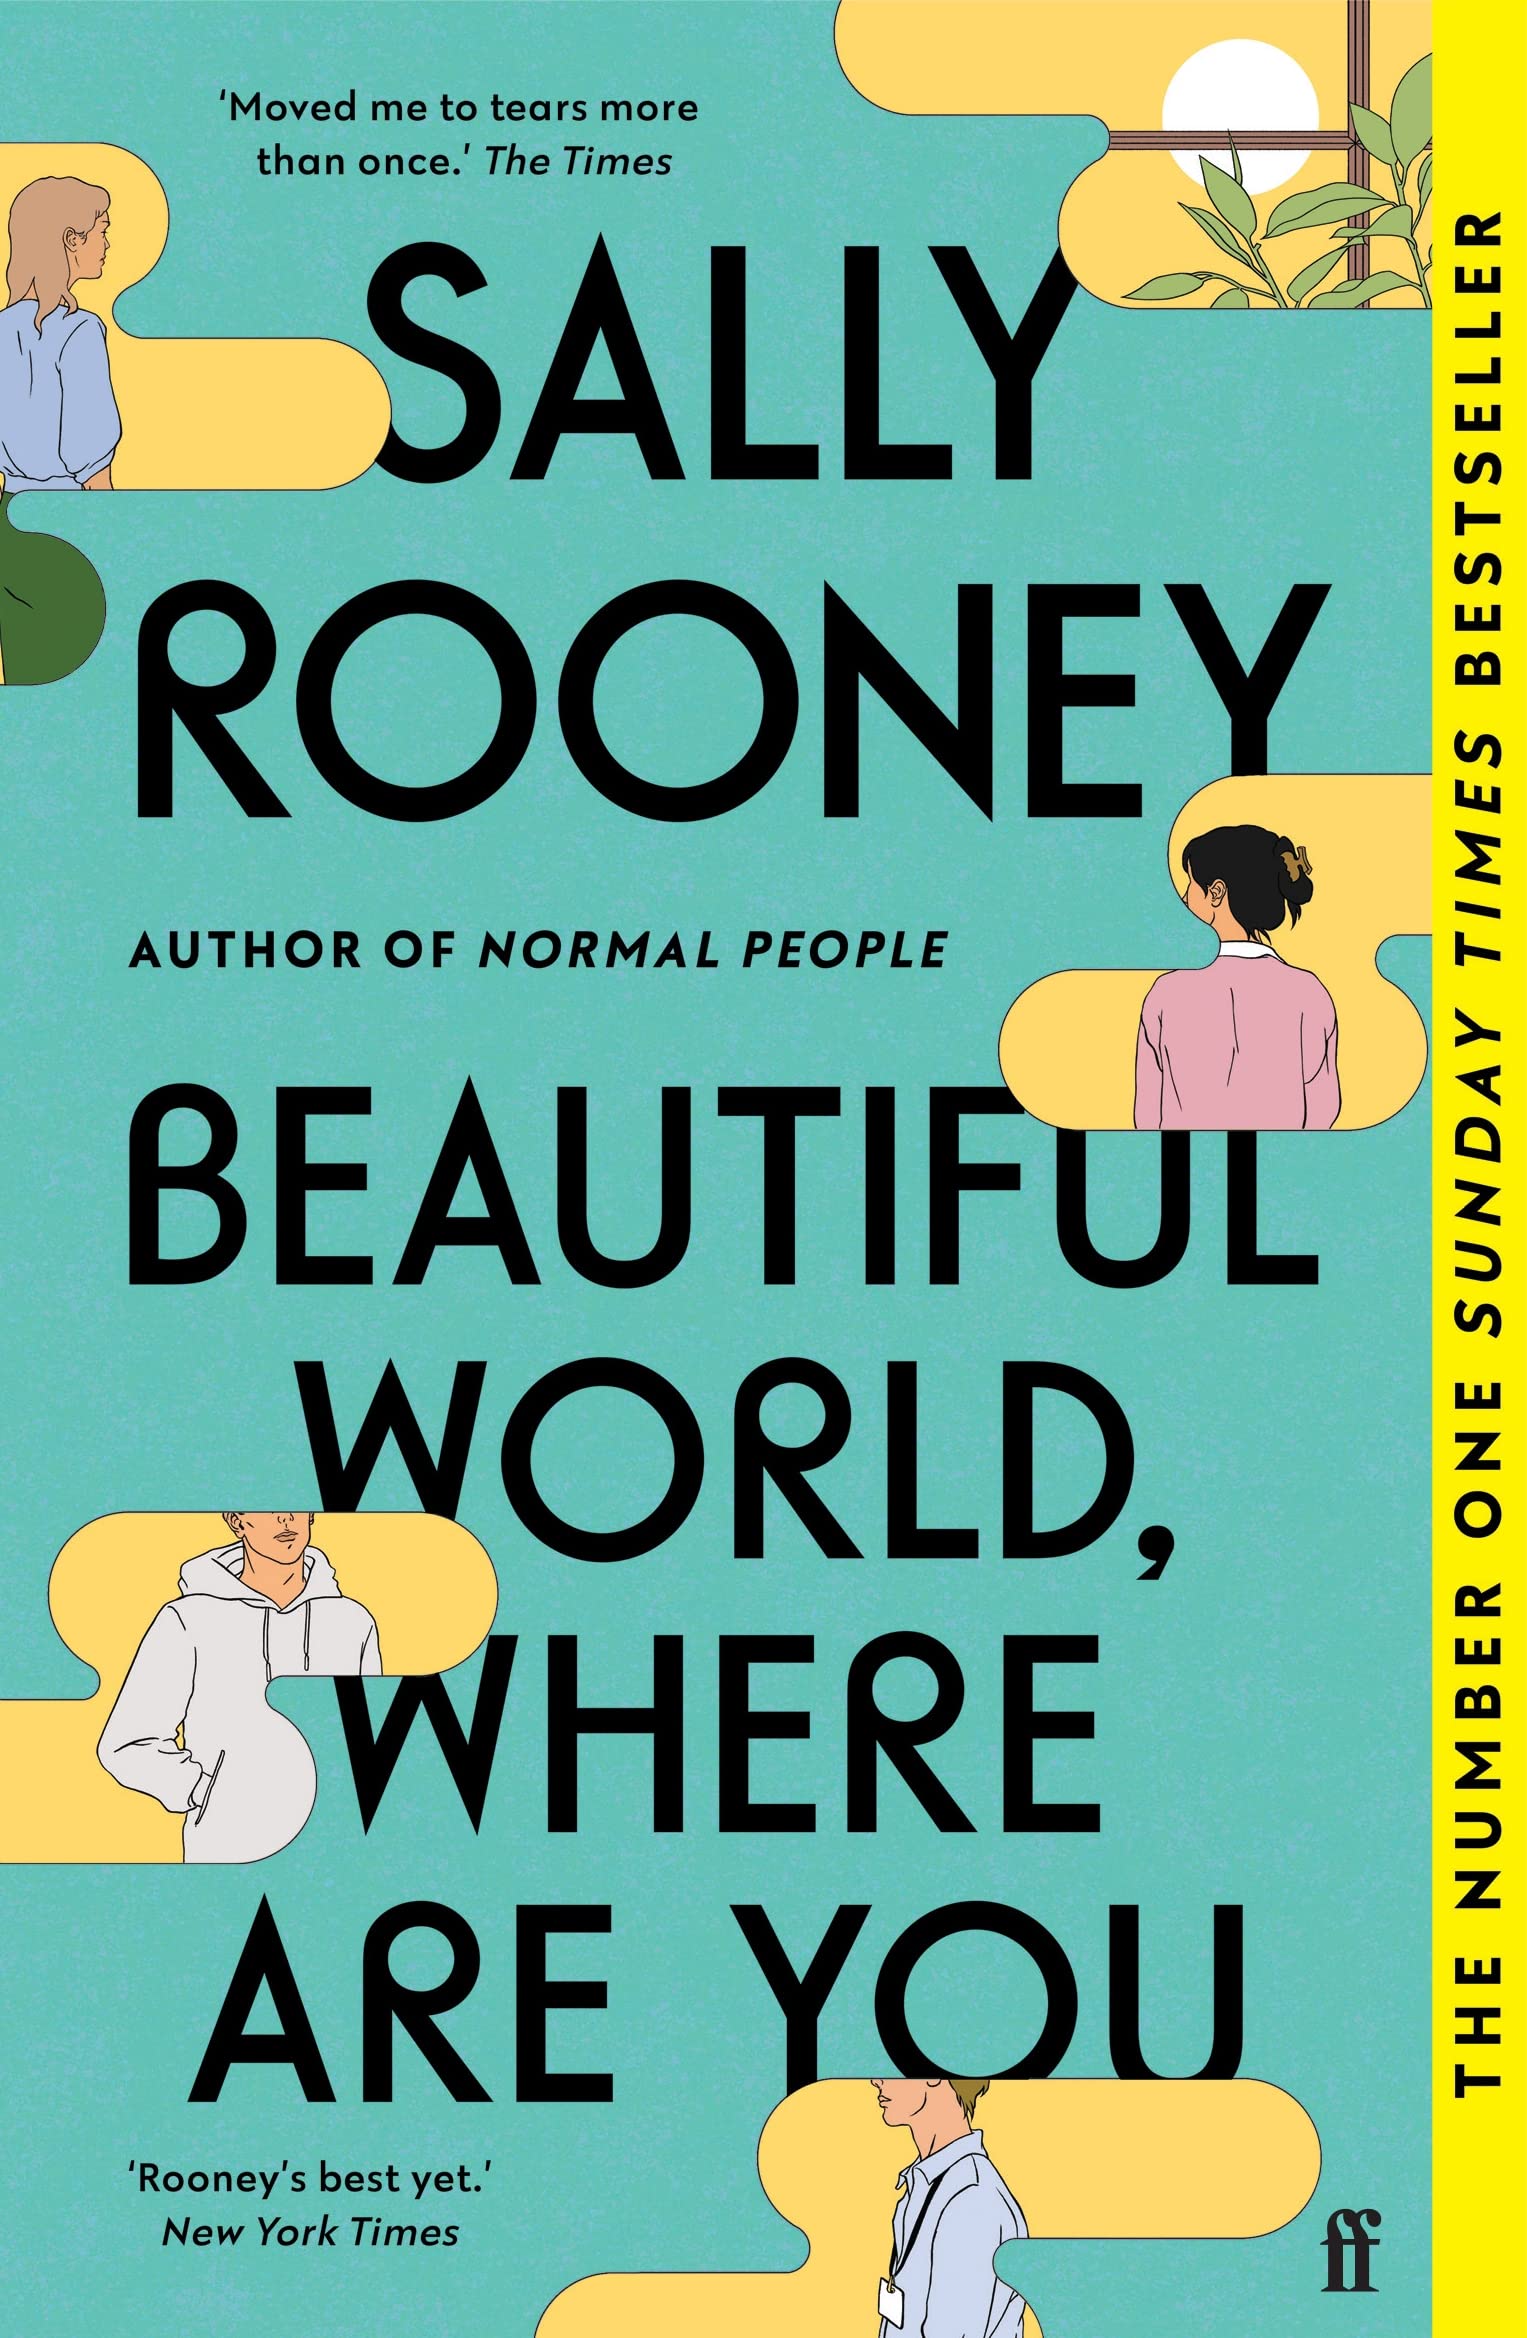 Beautiful World Where Are You Sally Rooney